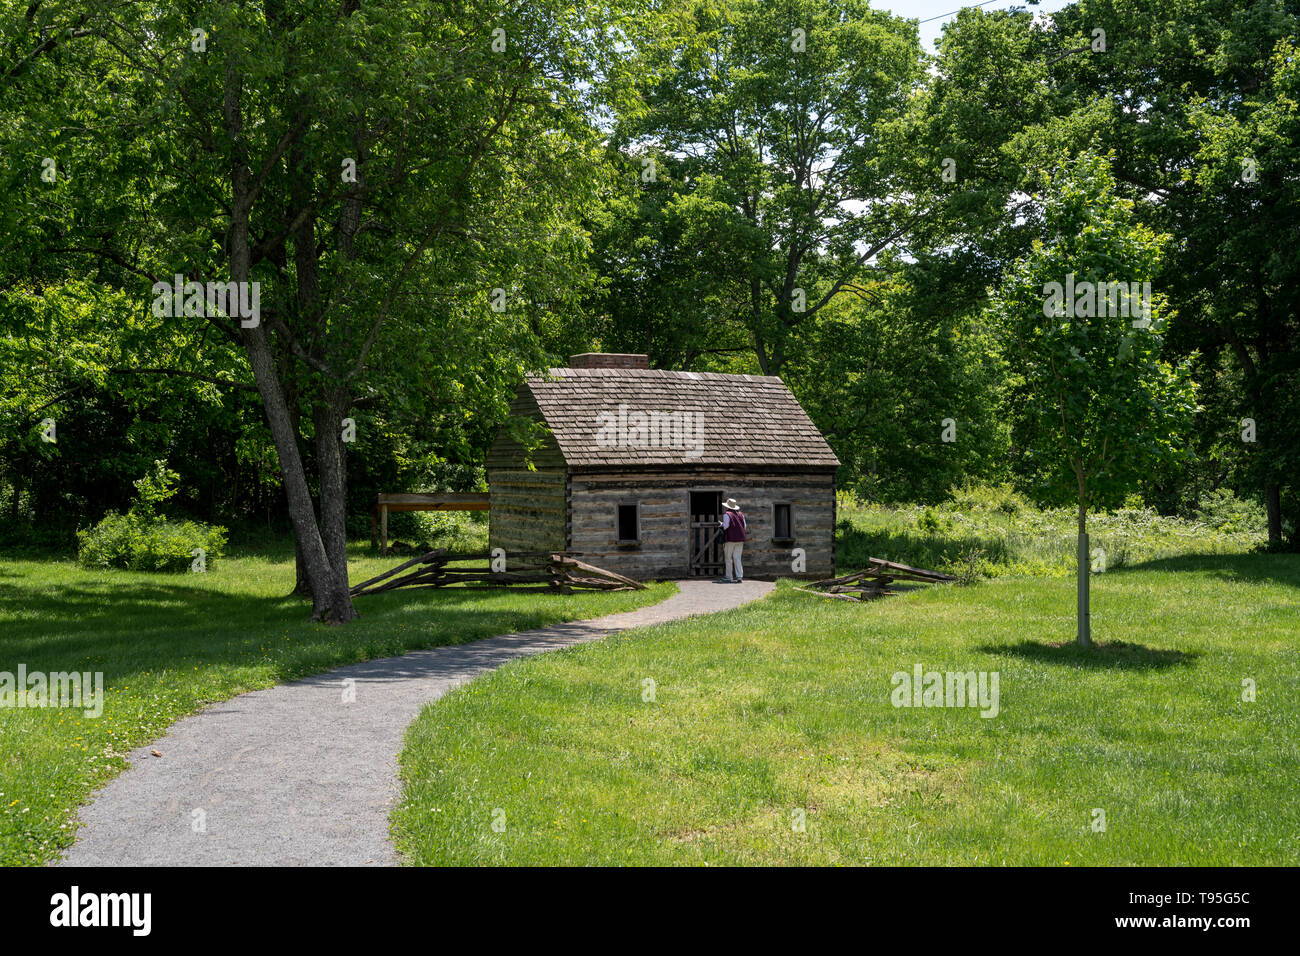 Chantilly, Virginia, USA -- May 16, 2019. A woman tourist examines a replication of slaves' quarters at the Sully Plantation in Chantilly, Virginia, U Stock Photo